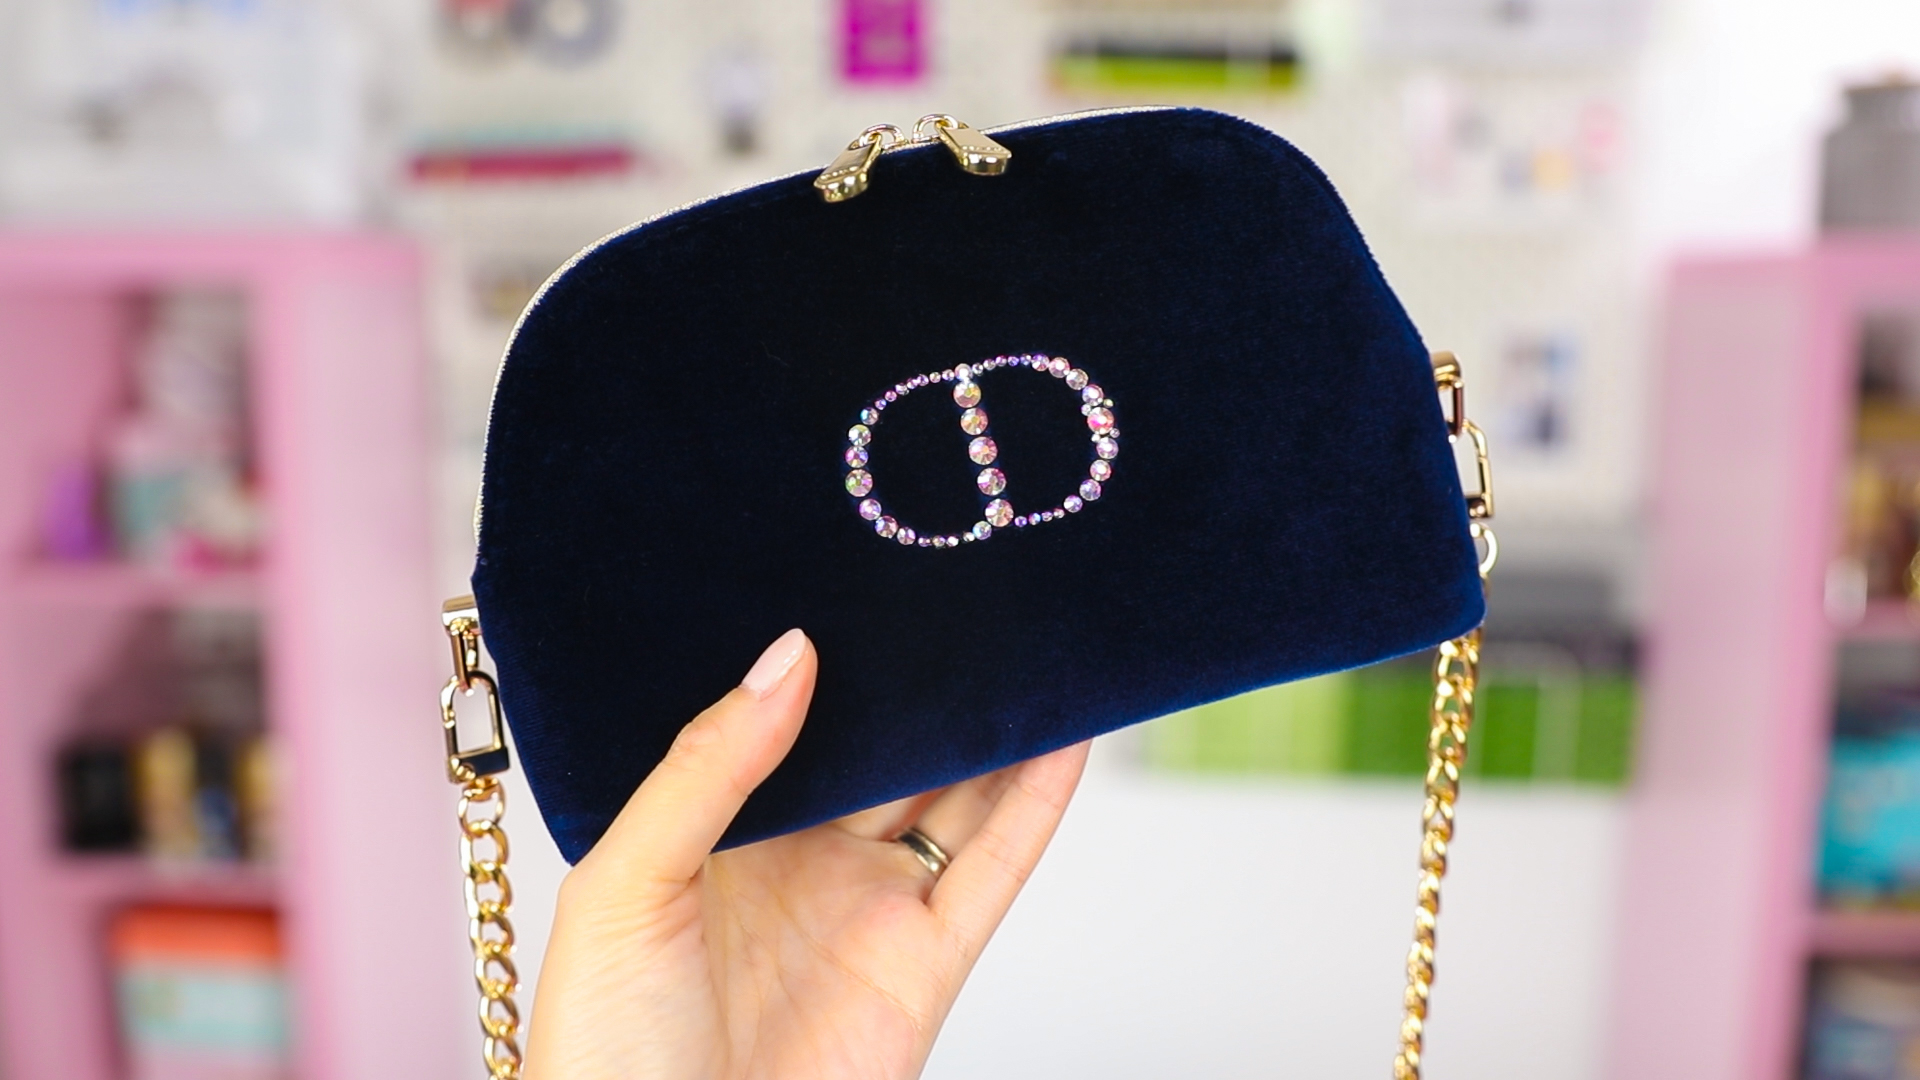 DIY Dior Nano Pouch // Dior Bags Under $1,000 - Turn Your Wallet